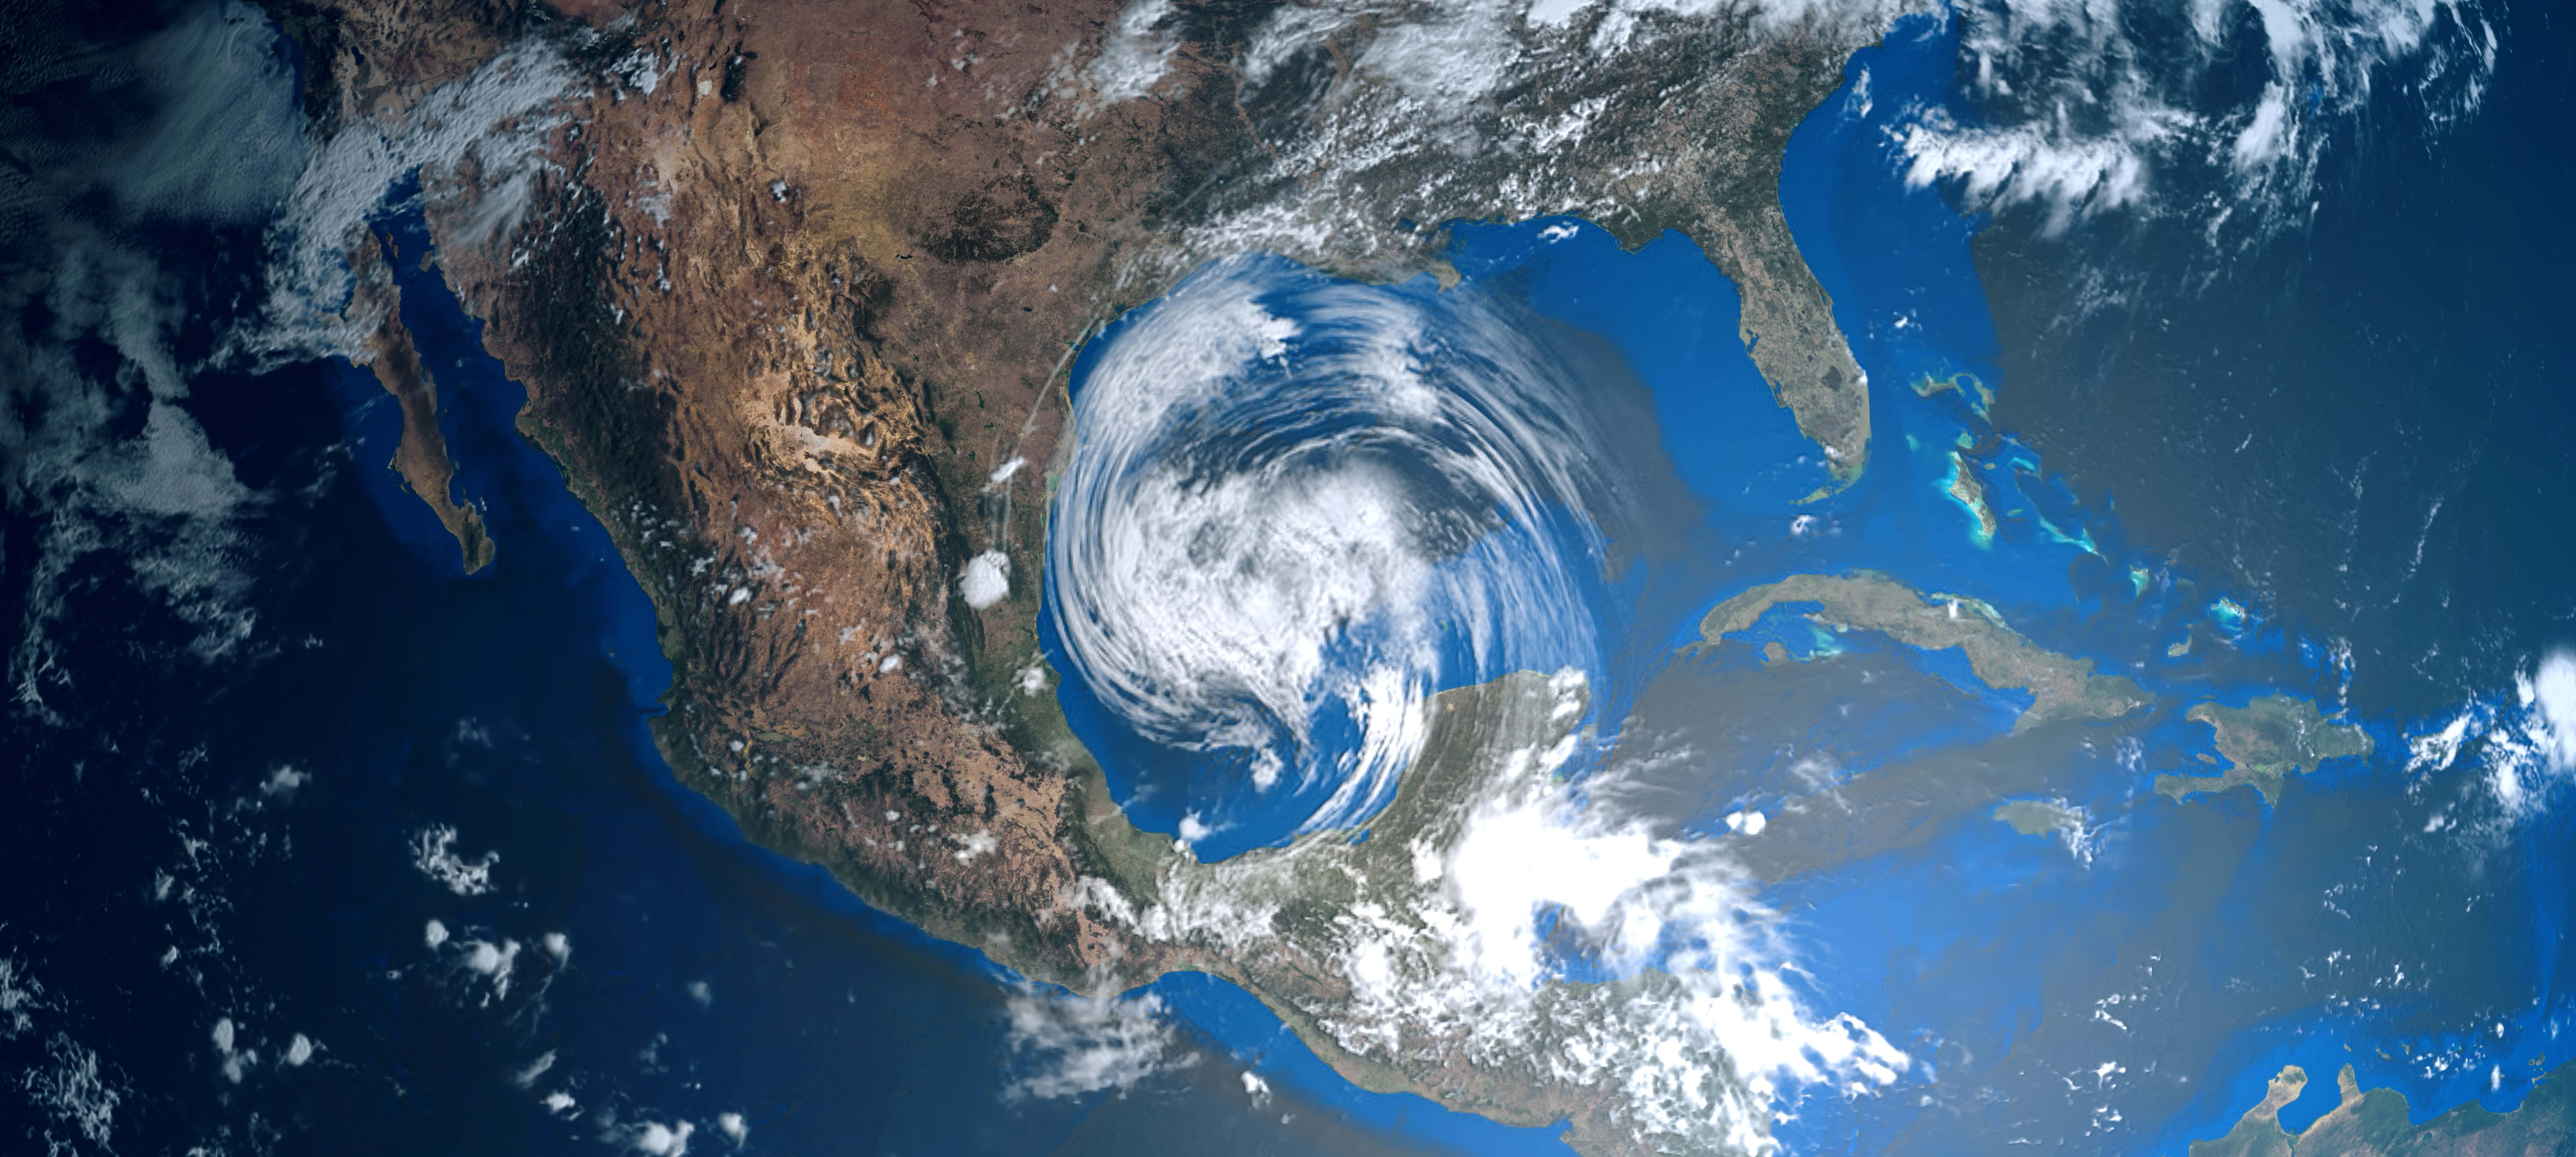 Hurricane approaching southern United States